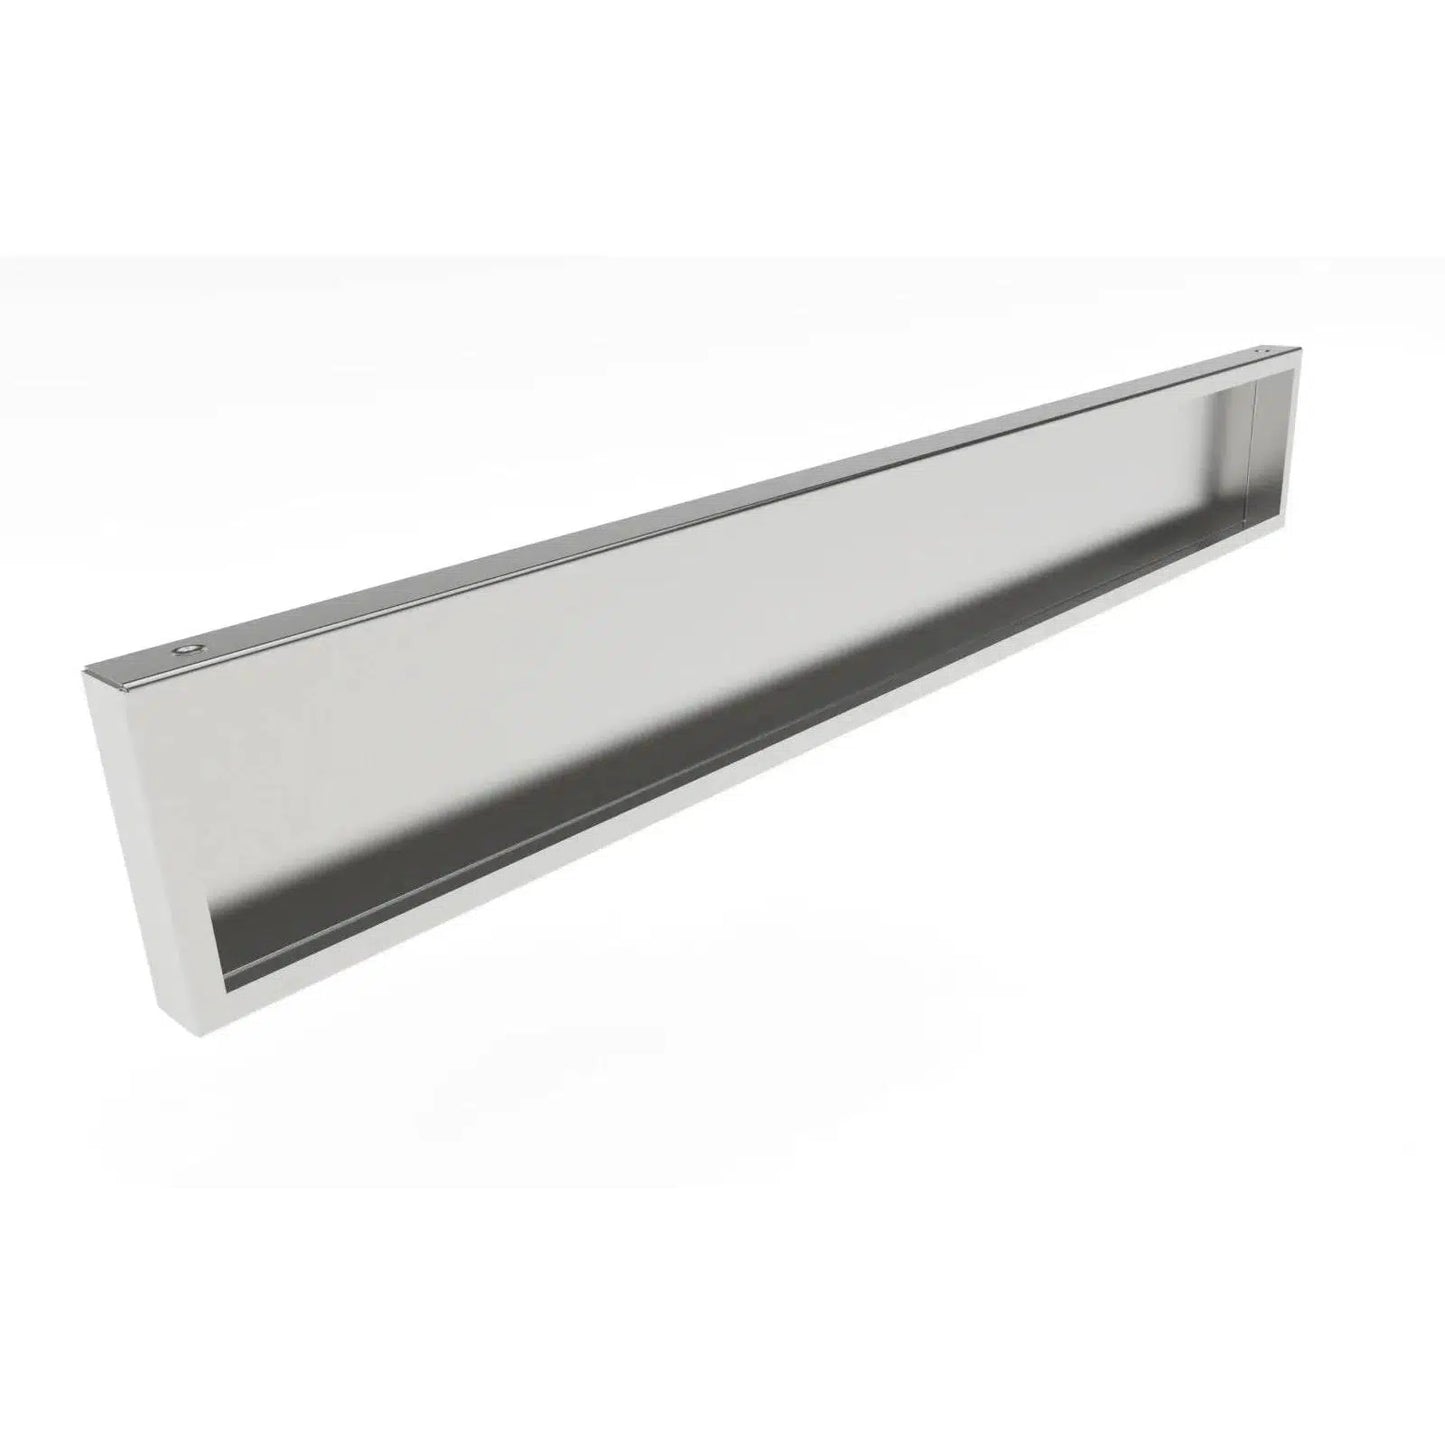 Sunstone Stainless Steel Universal Kickplate for Left & Right Sides